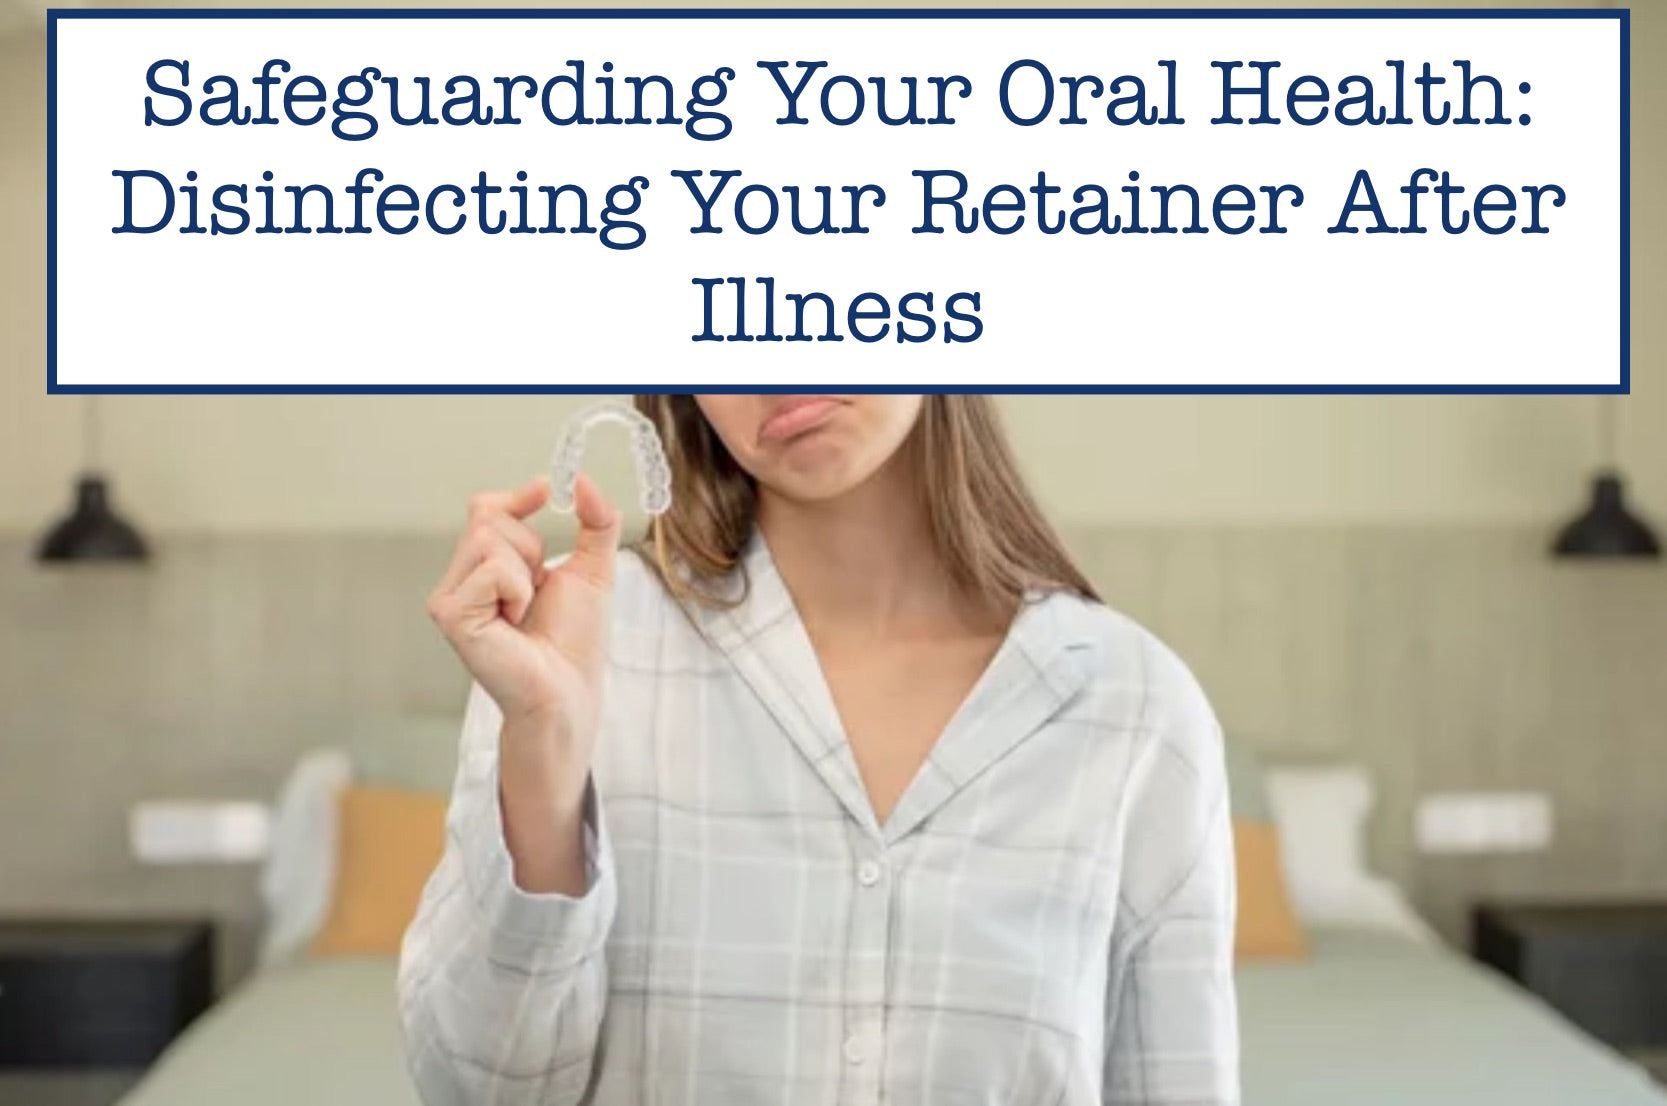 Safeguarding Your Oral Health: Disinfecting Your Retainer After Illness